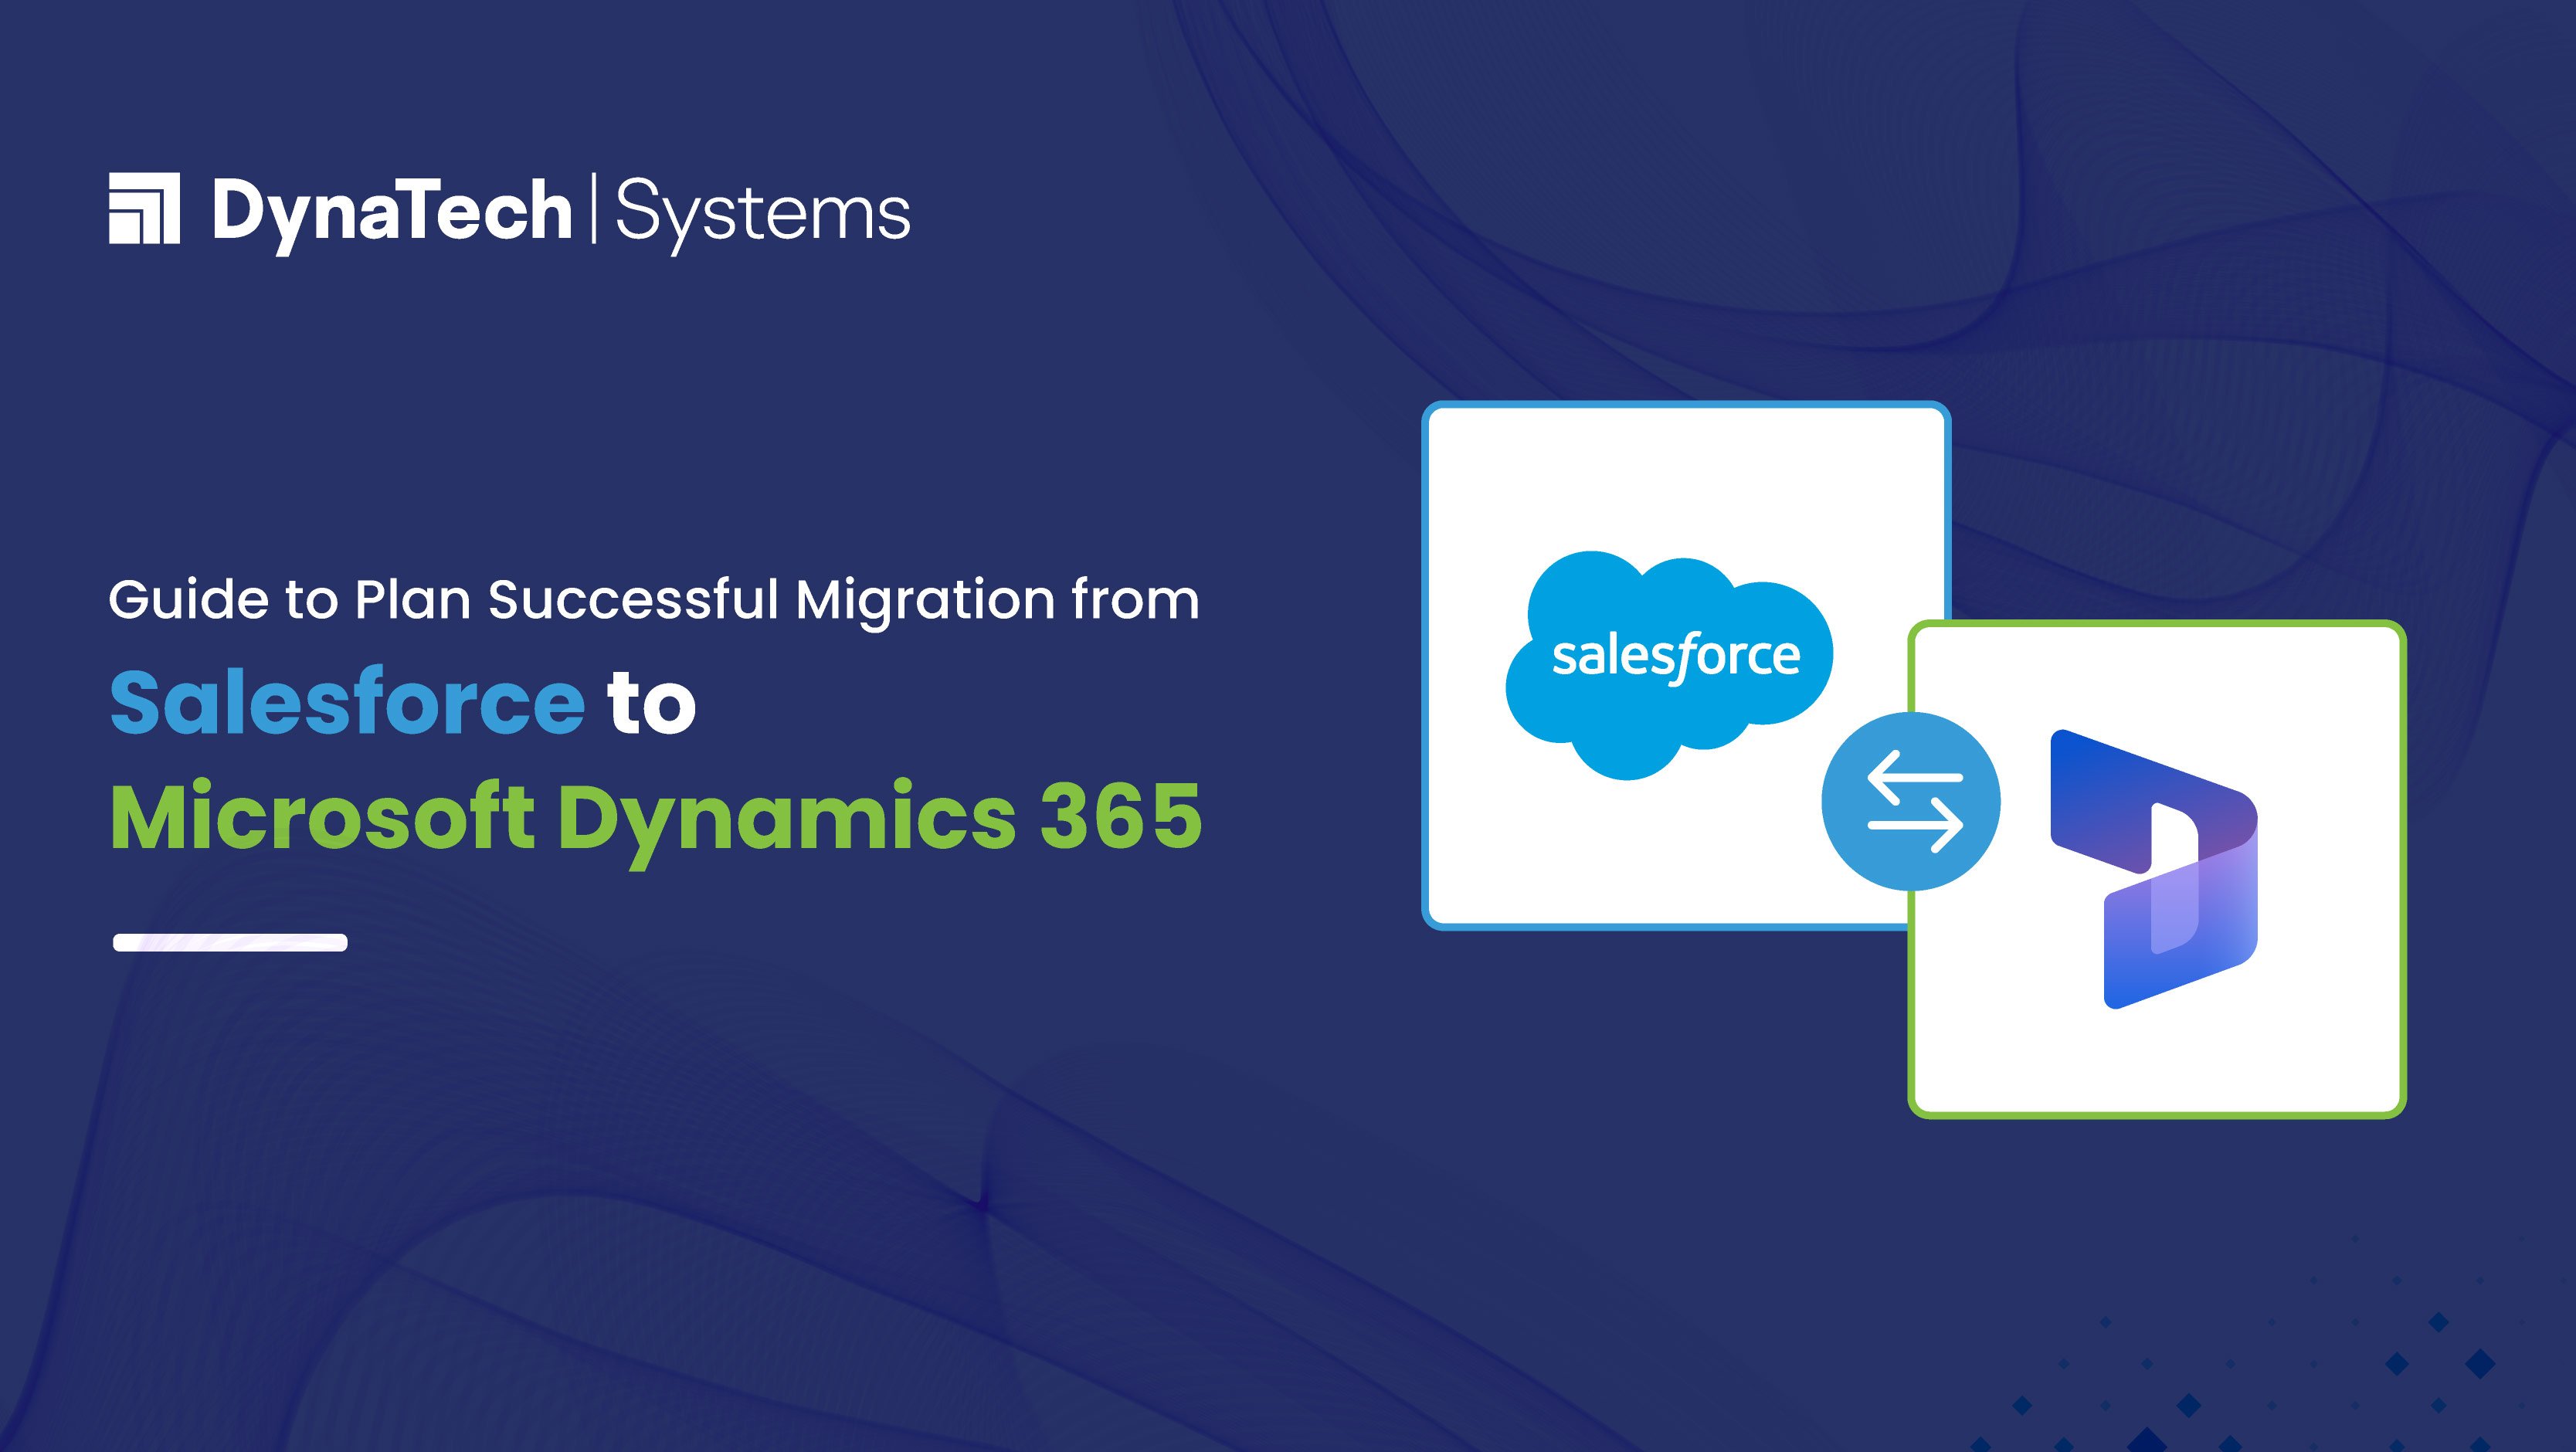 Guide to Plan Successful Migration from Salesforce to Microsoft Dynamics 365